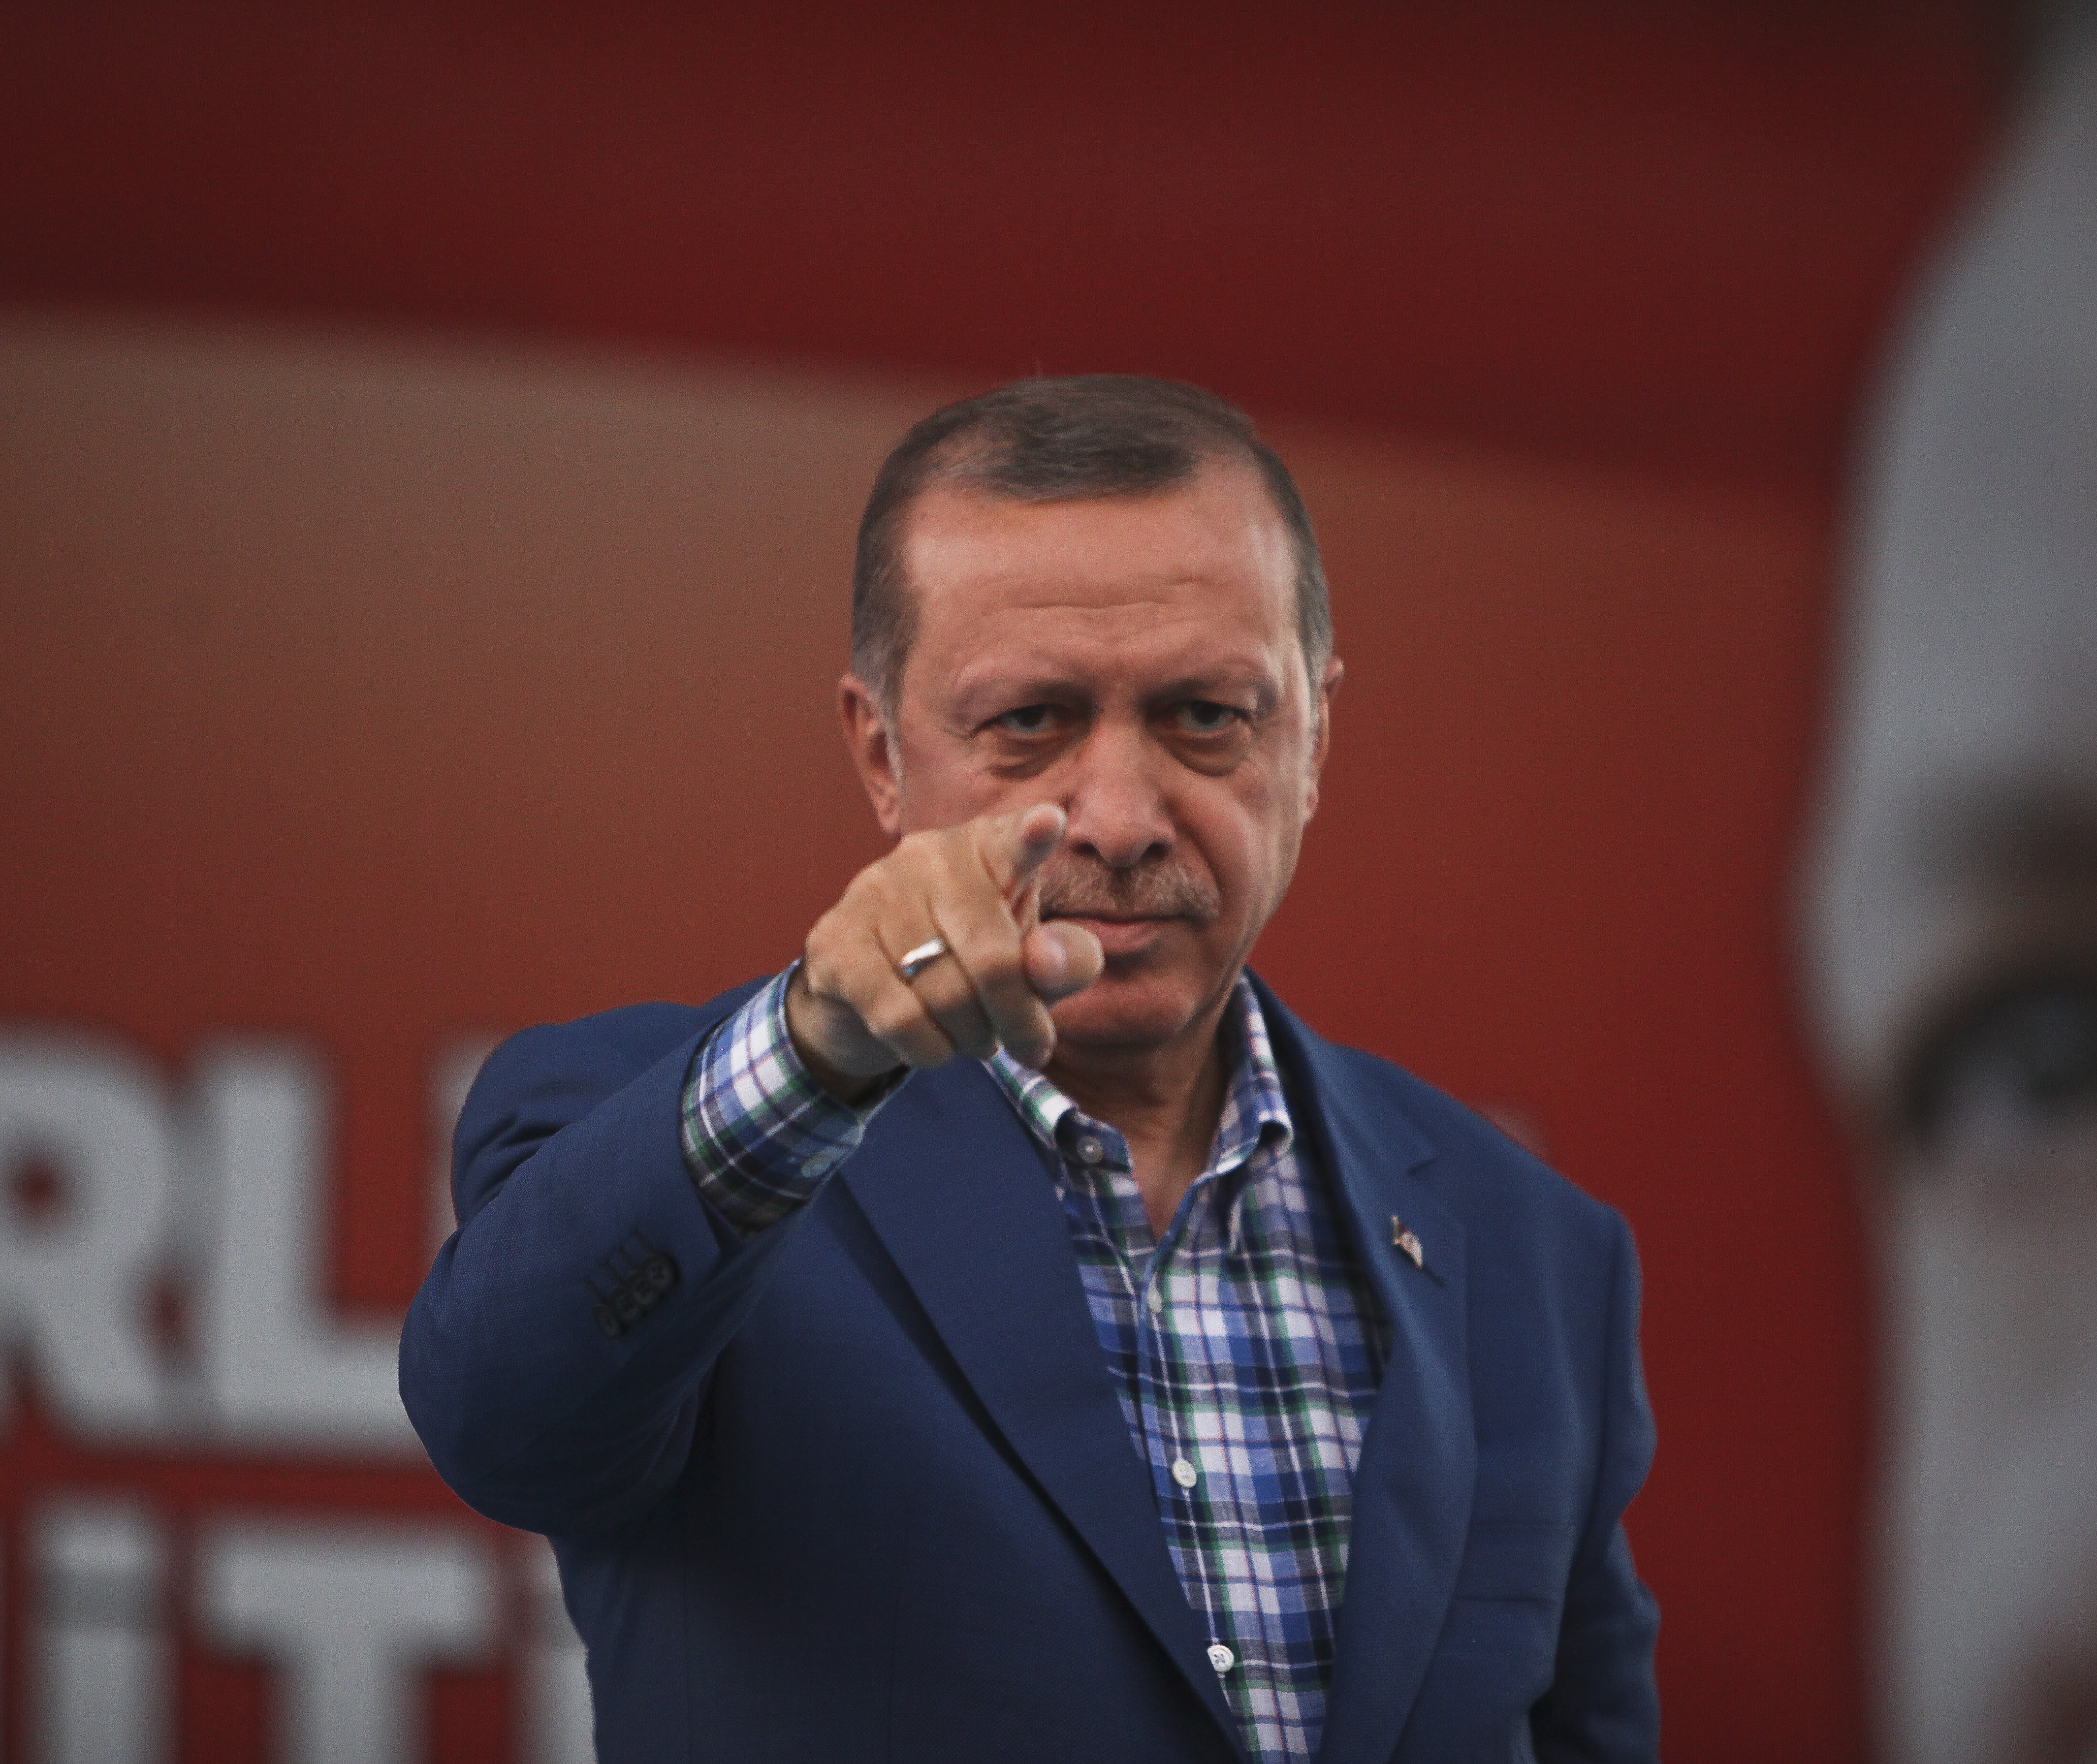 Erdogan says 'There is no Kurdish issue' and accuses Kurd leader of supporting 'terrorism' 1